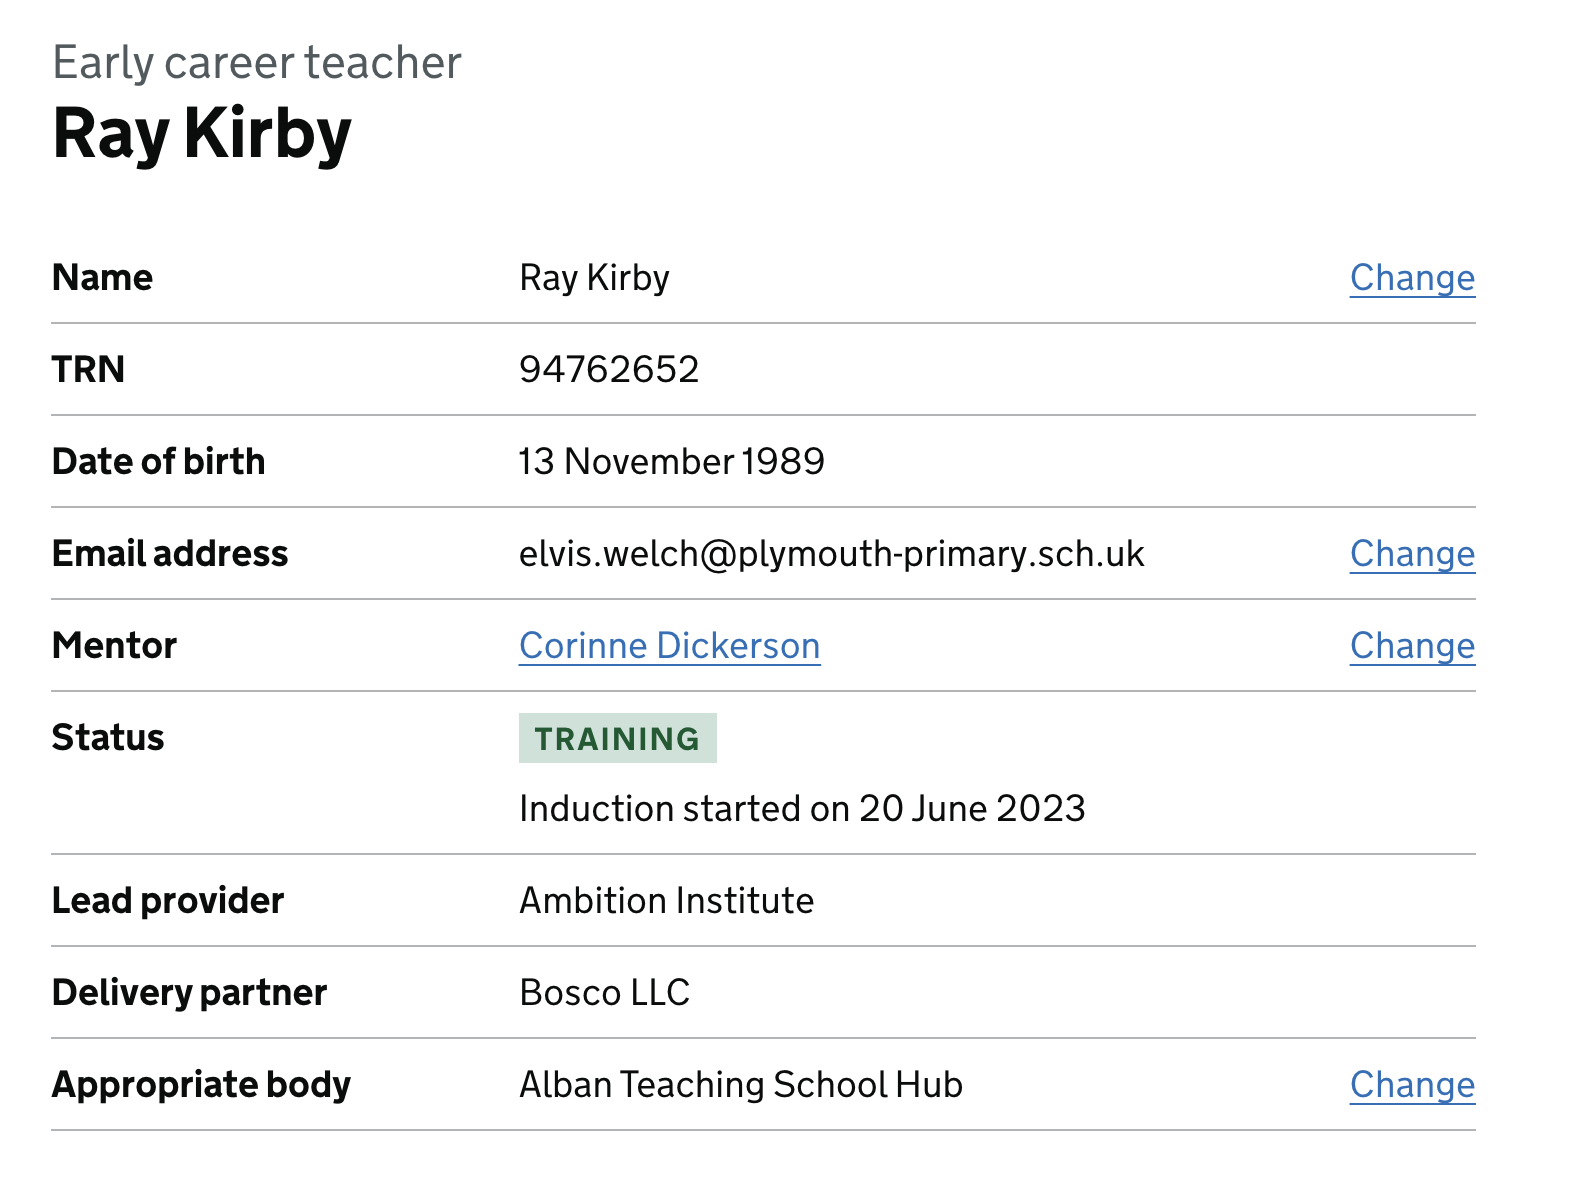 Screenshot showing a summary of an early career teacher, with their induction start date listed within a 'Status' row